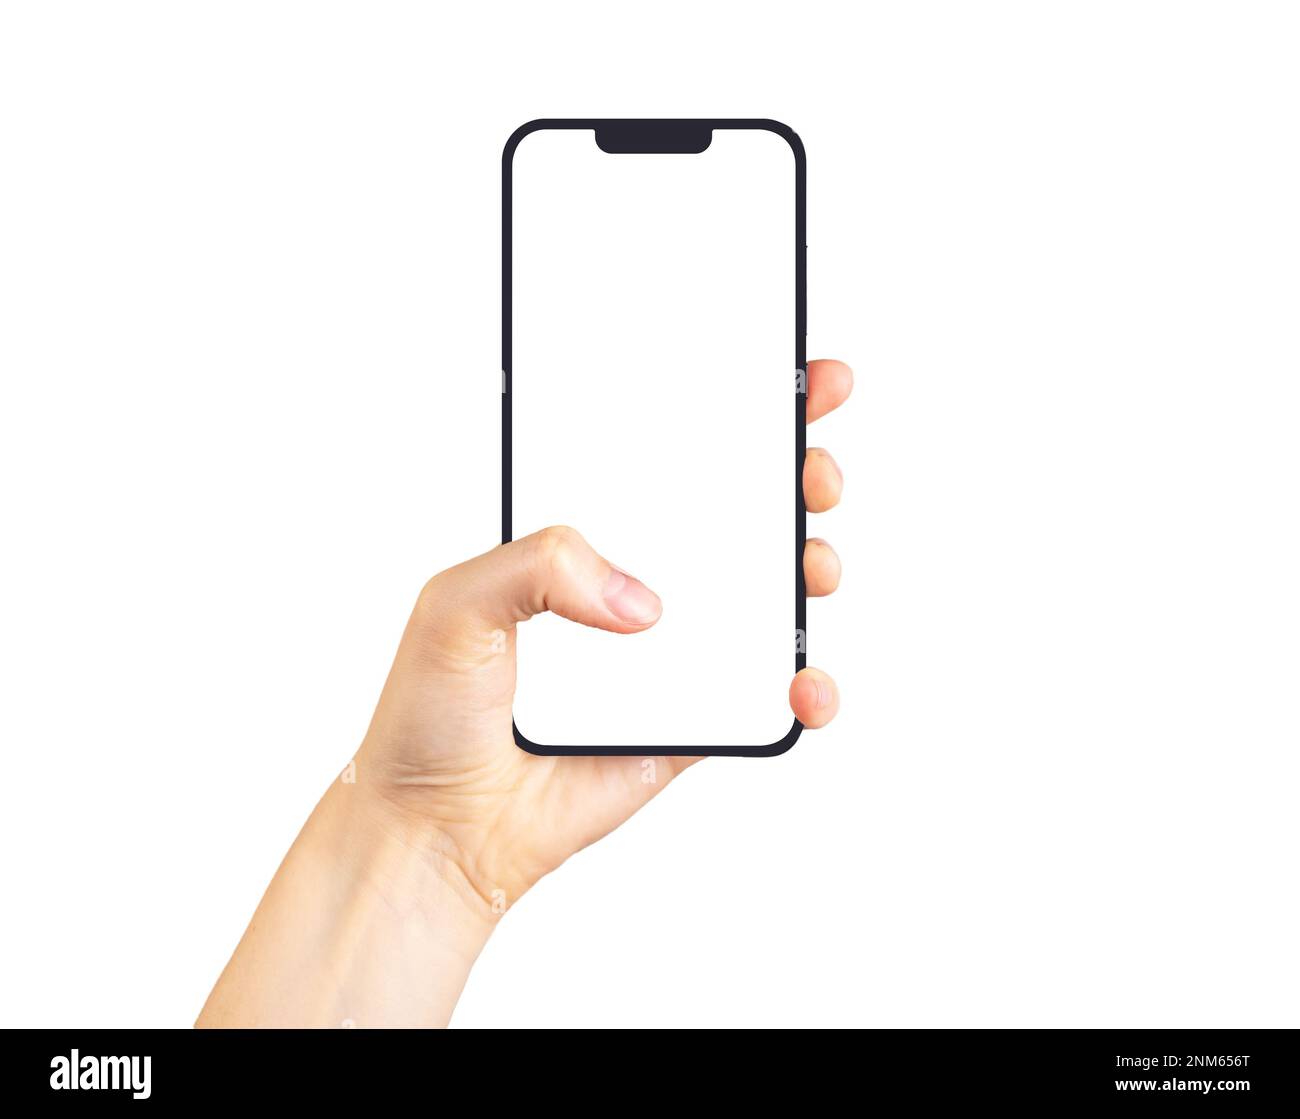 Lodz, Poland February 05 2023 Mobile phone screen mockup, blank smartphone in hand with thumb finger clicking tapping on display isolated on white bac Stock Photo